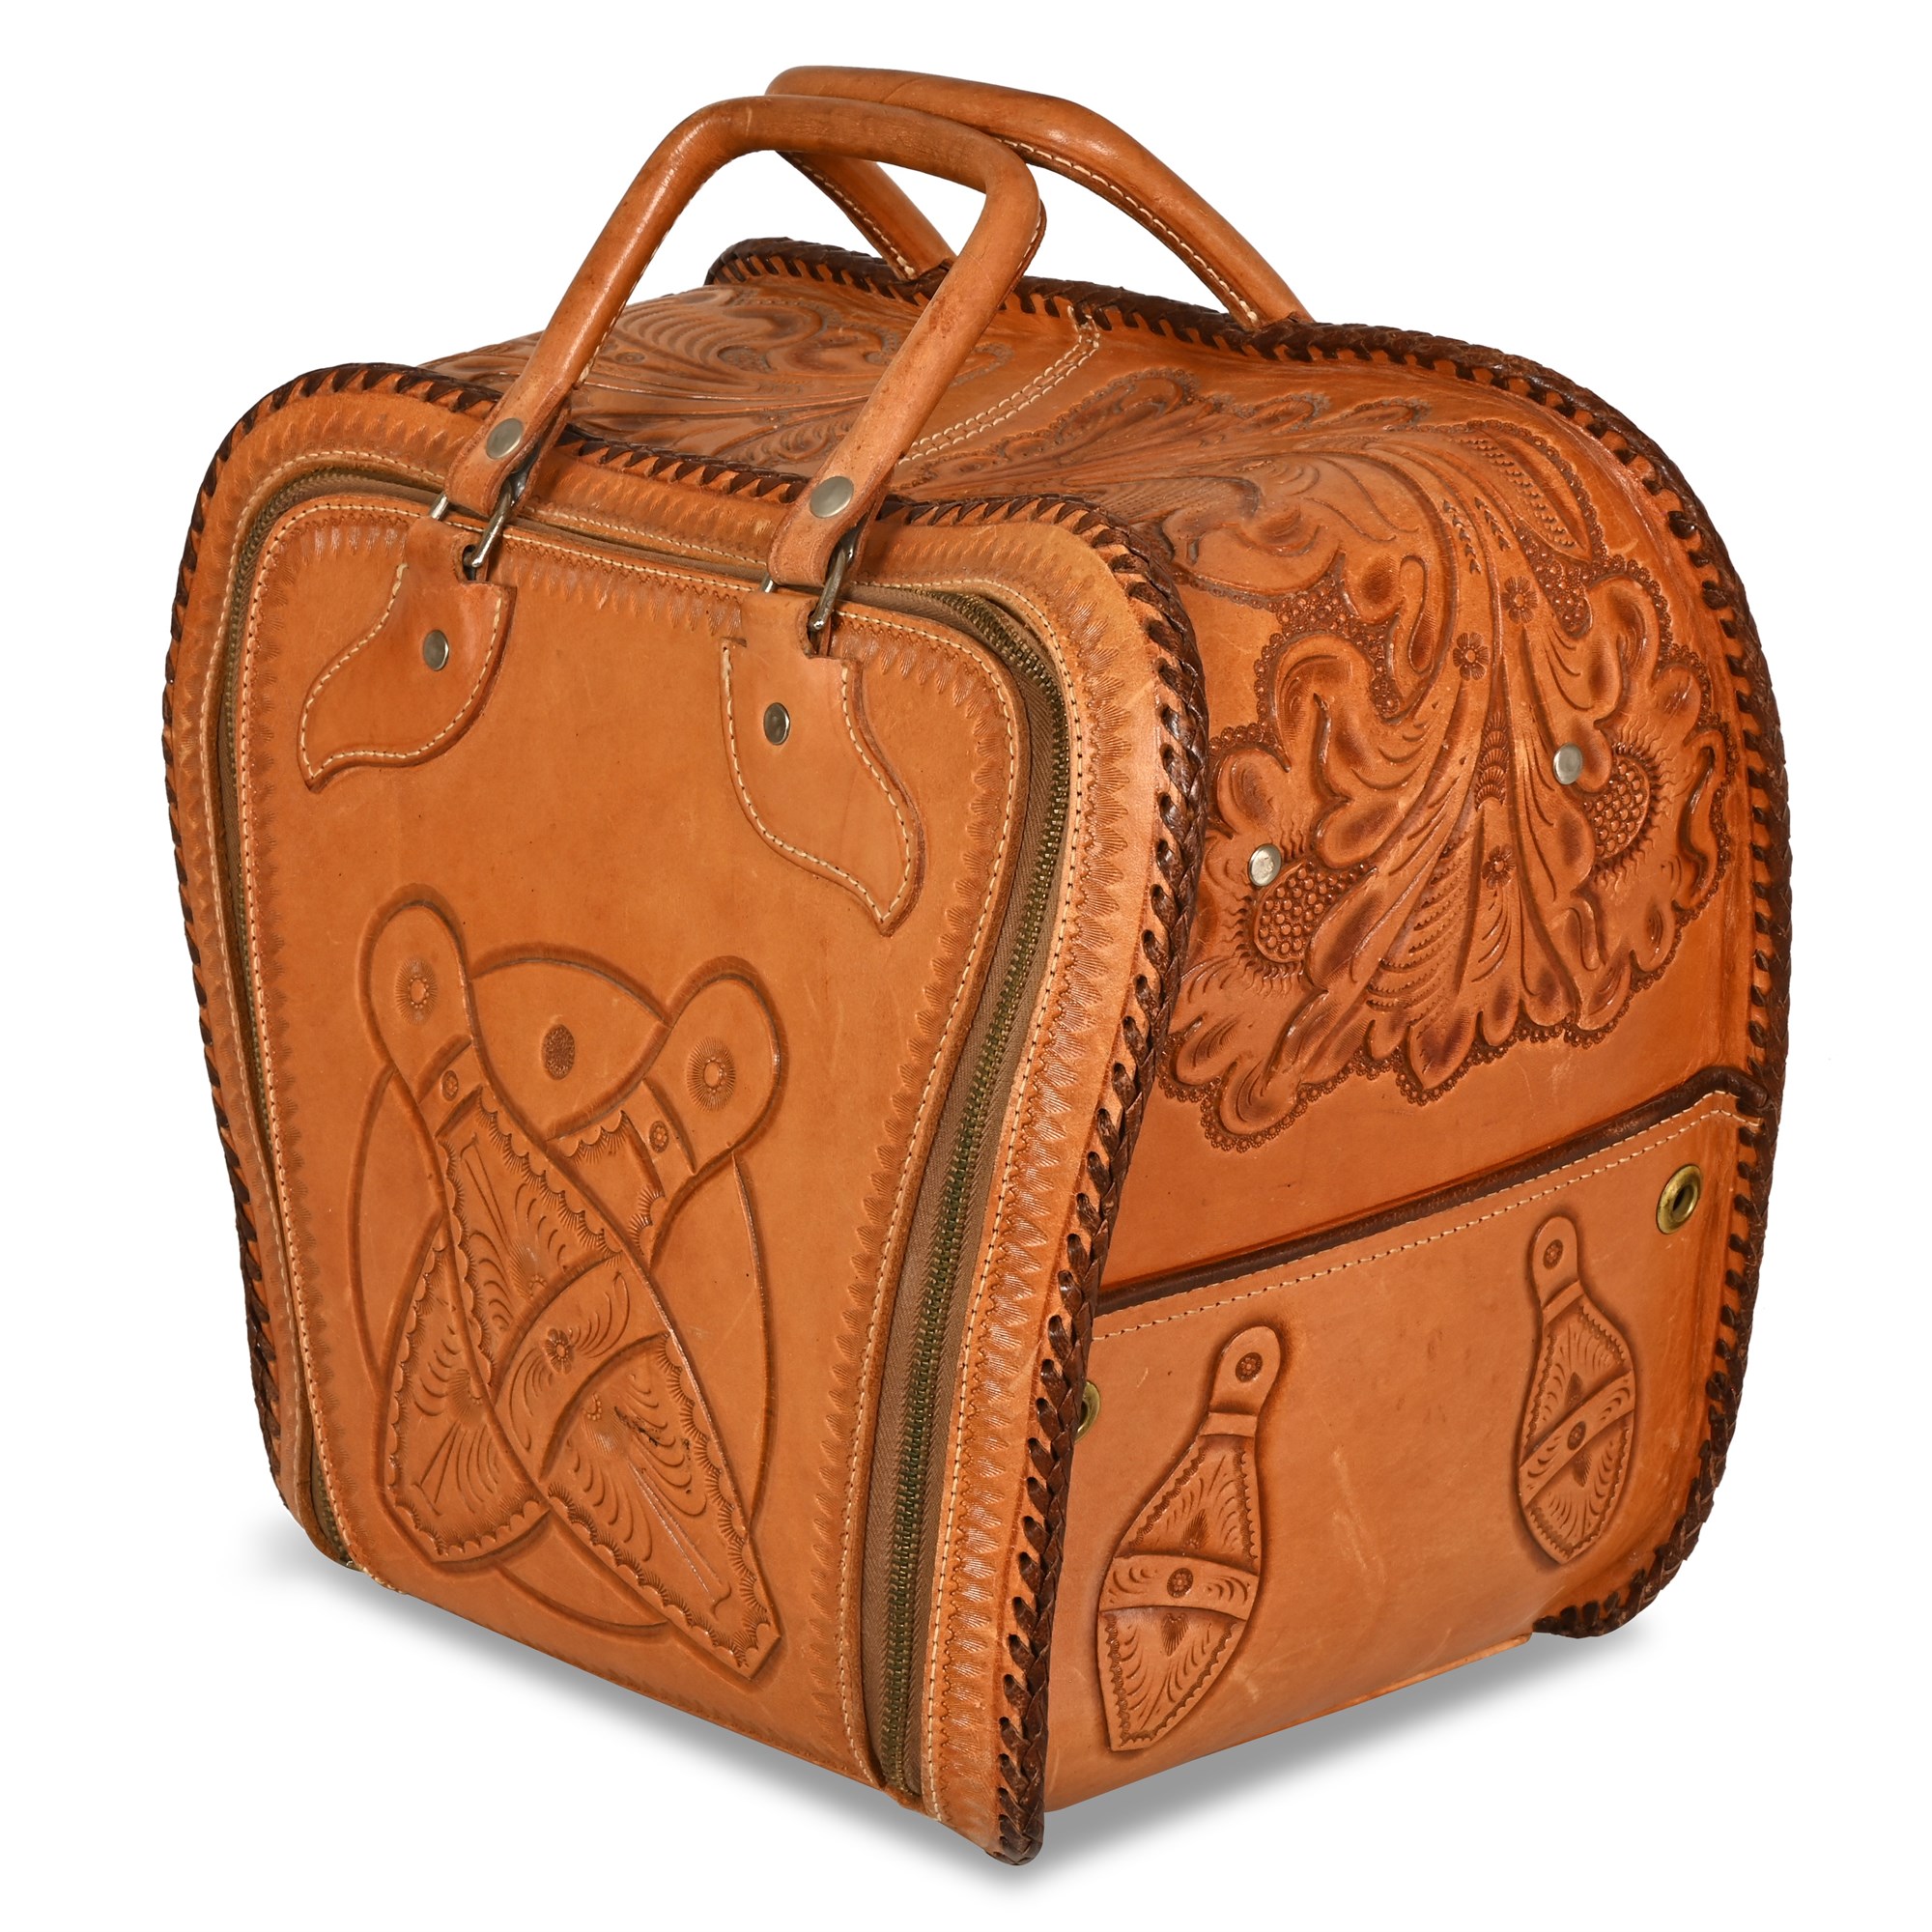 NM Auctions  Innovative Auction, Liquidation & Estate Sales - Mid-Century  Tooled Leather Bowling Bag from Mexico